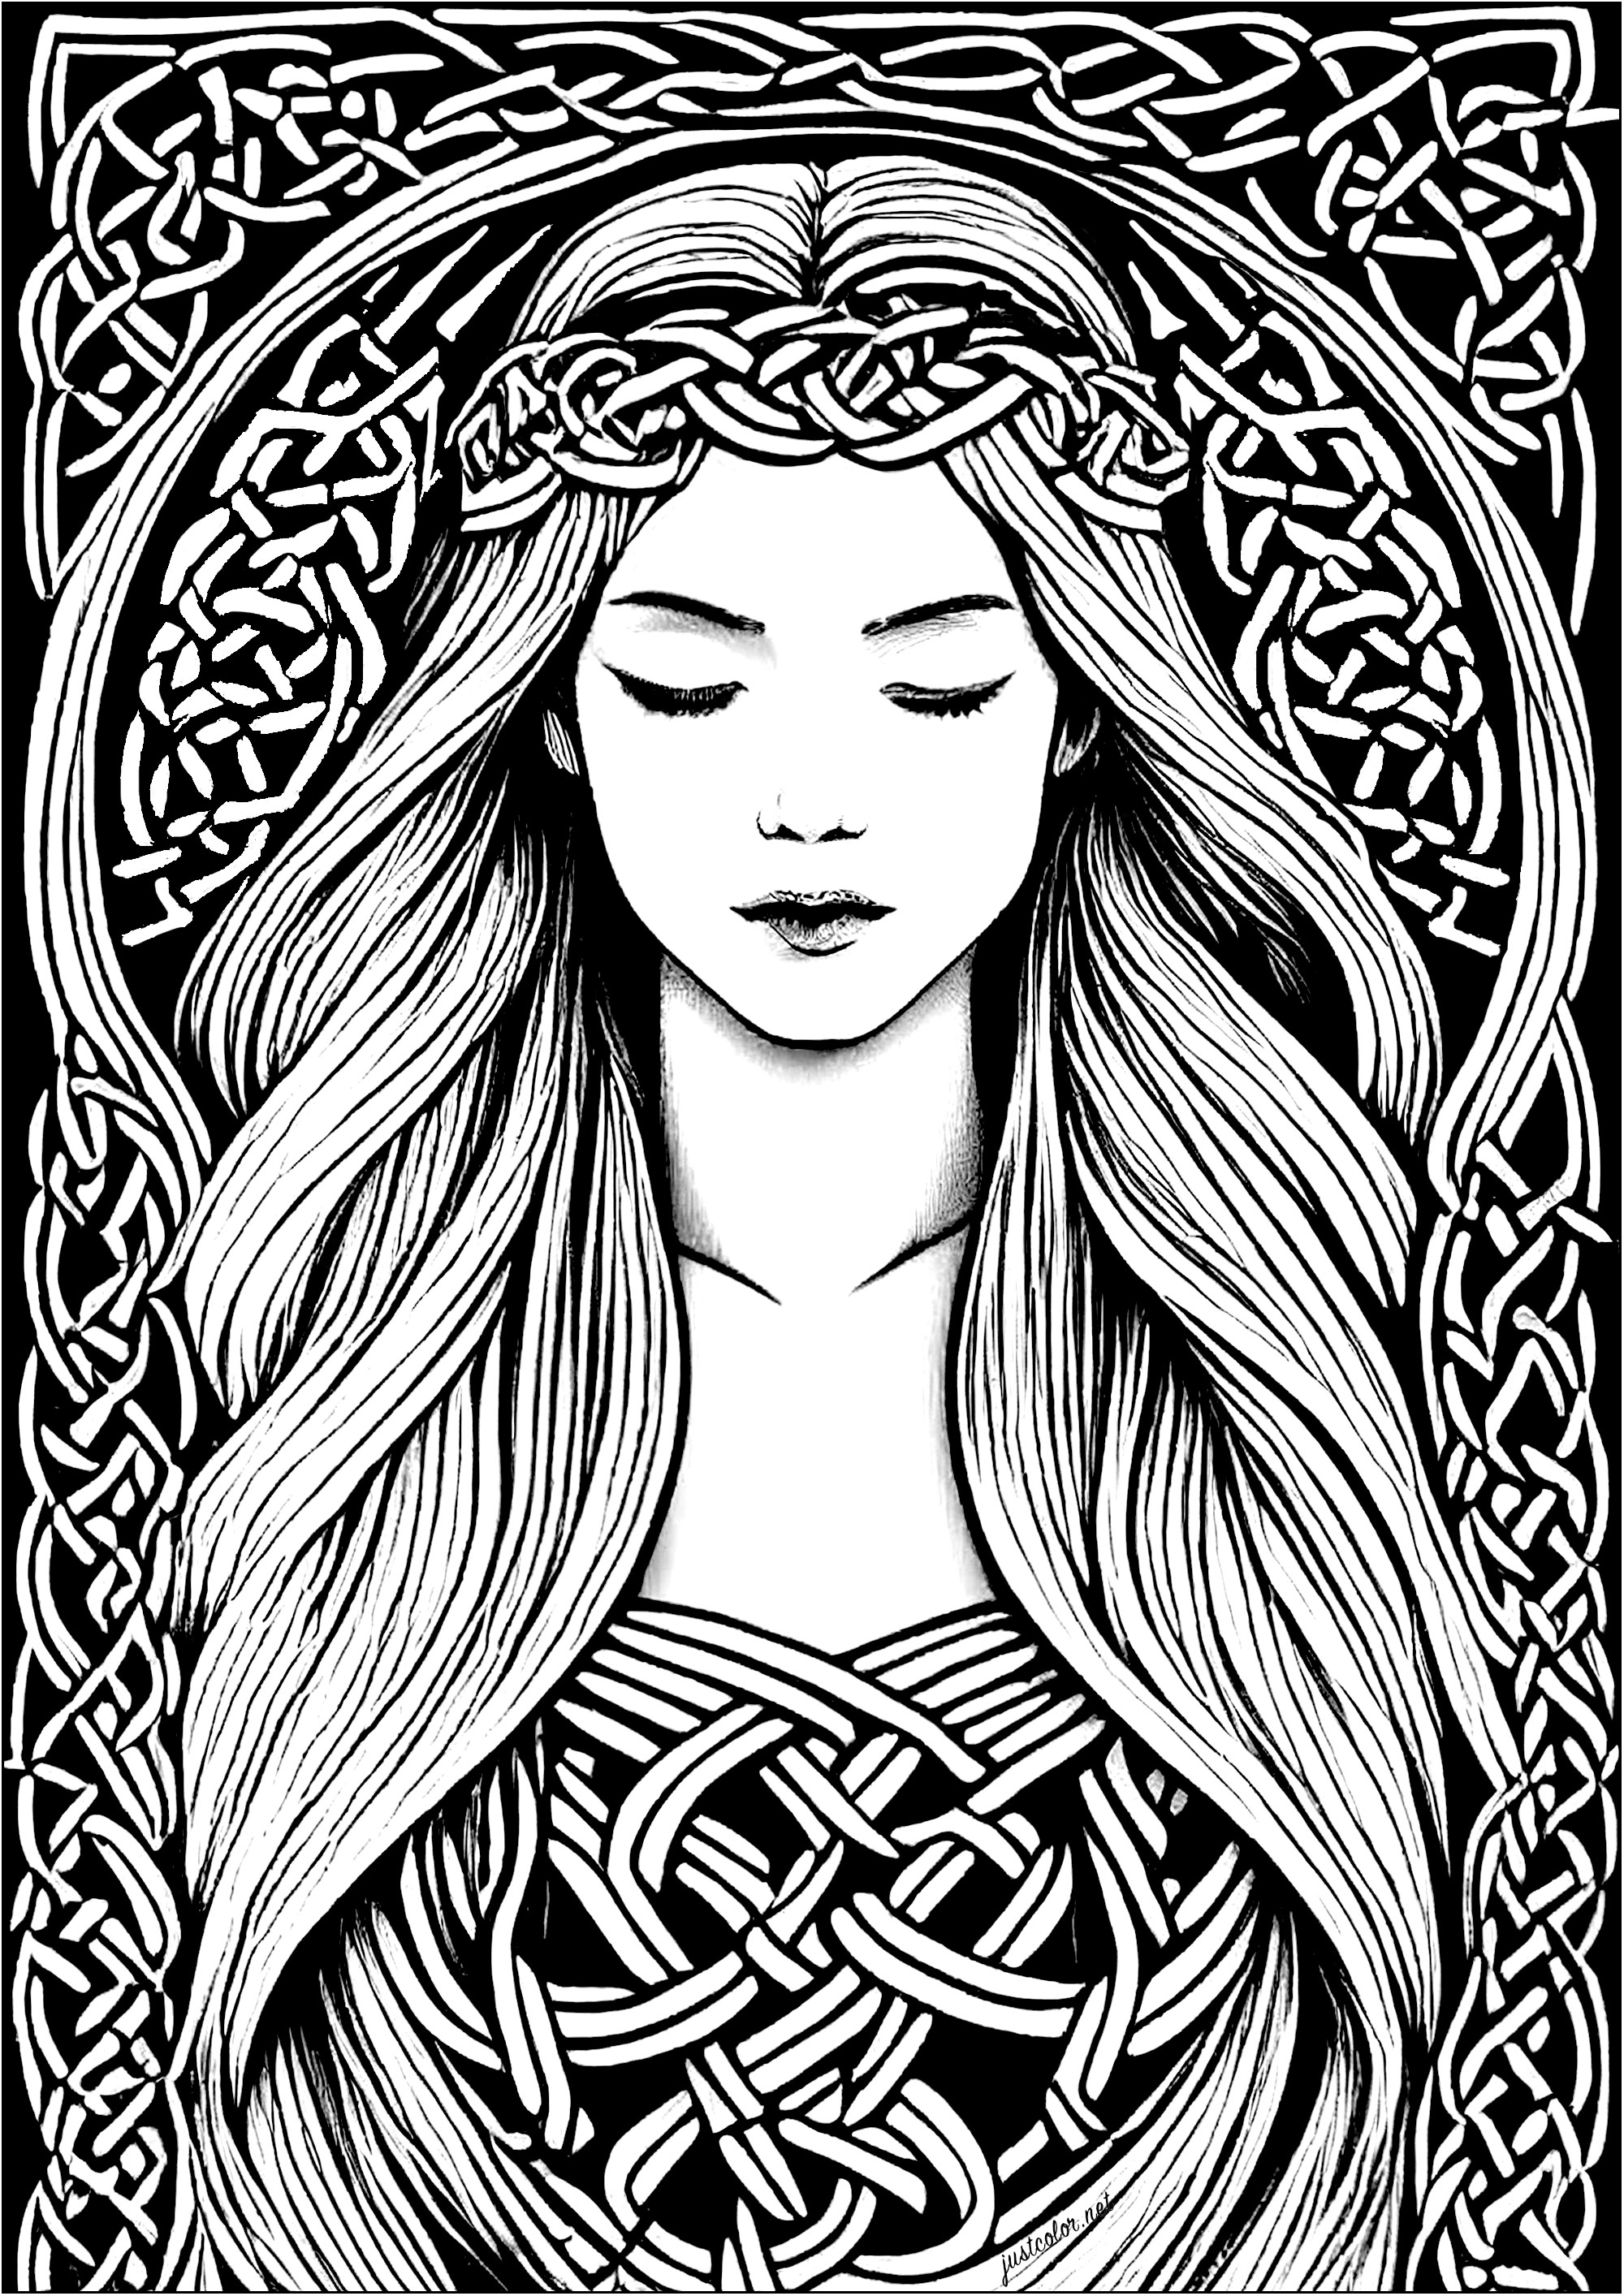 Coloring of a sleeping young woman, inspired by Celtic art. The motifs throughout the design are inspired by Celtic motifs, characterized by their intricate, root-like plant forms.